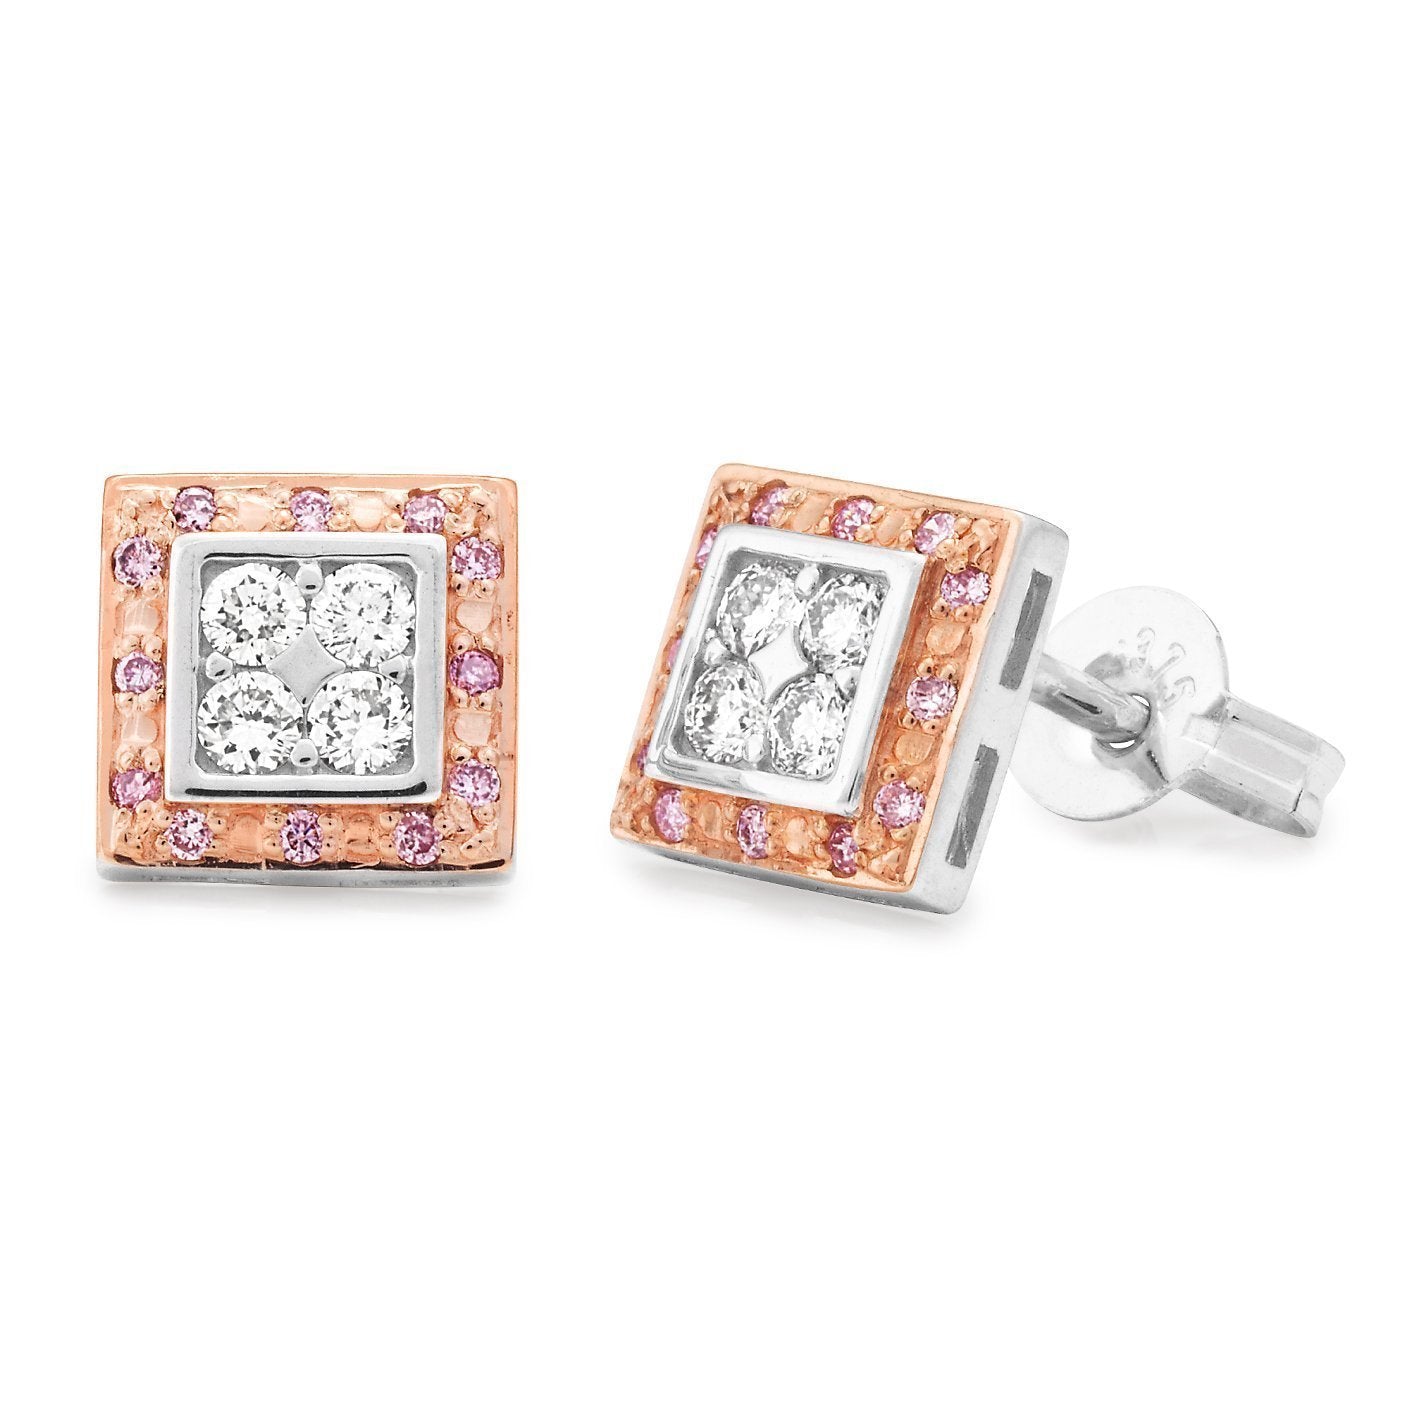 PINK CAVIAR 0.28ct Pink Diamond Earrings in 9ct White & Rose Gold